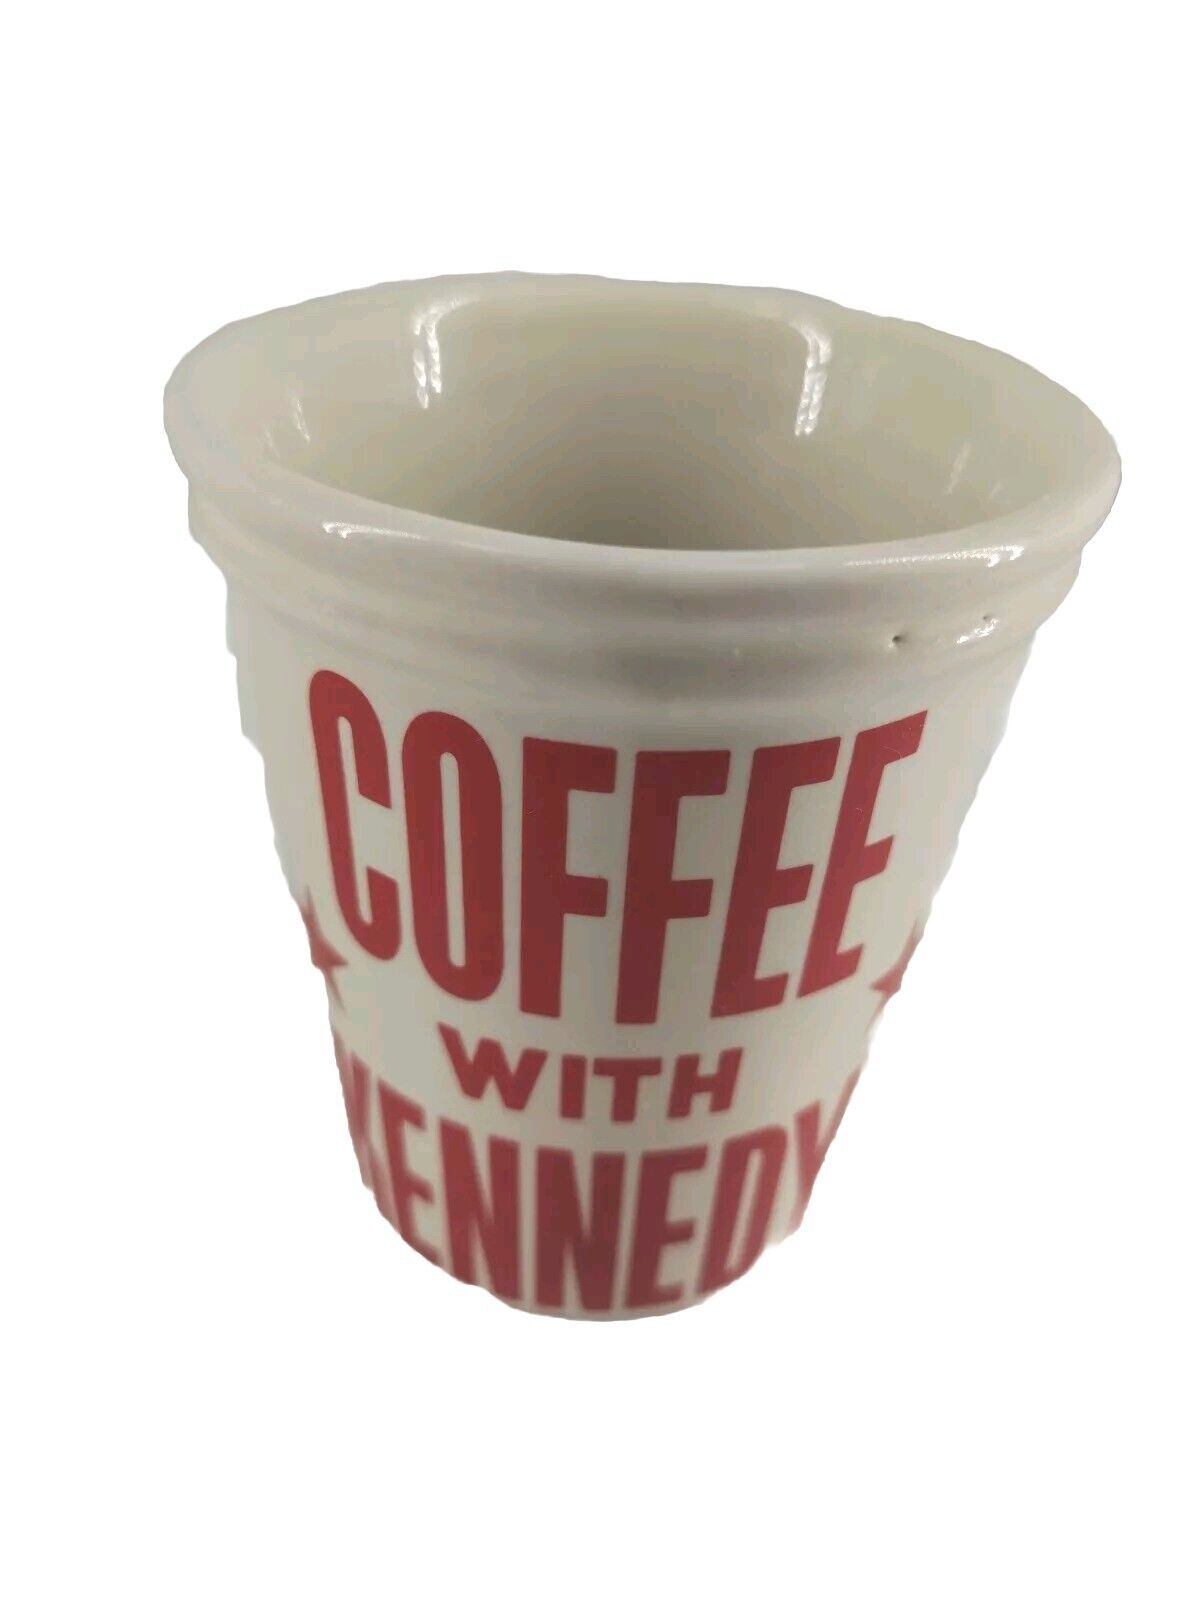 Vtg Coffee With Kennedy Cup The Sixth Floor Museum At Delaney Plaza 3.5